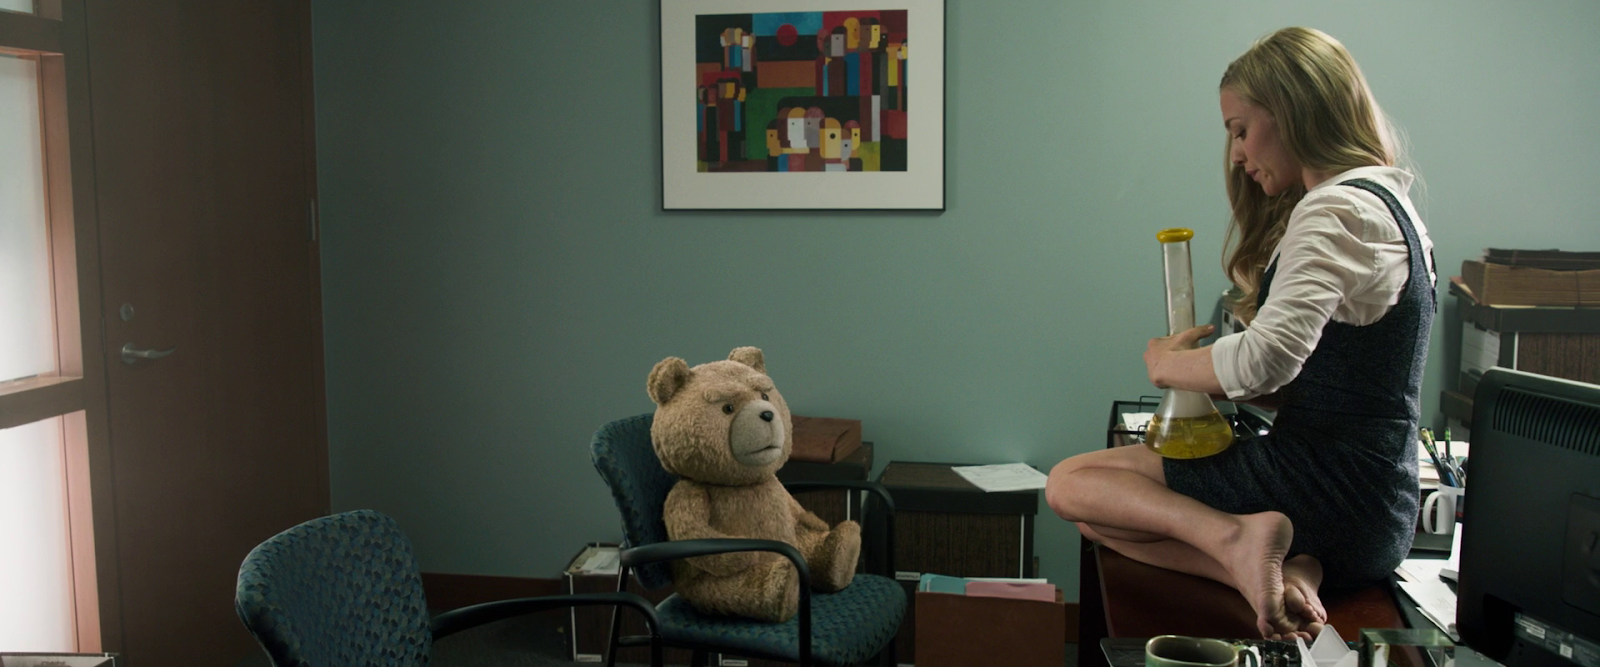  Ted 2 (2015) UNRATED HD 1080p Latino